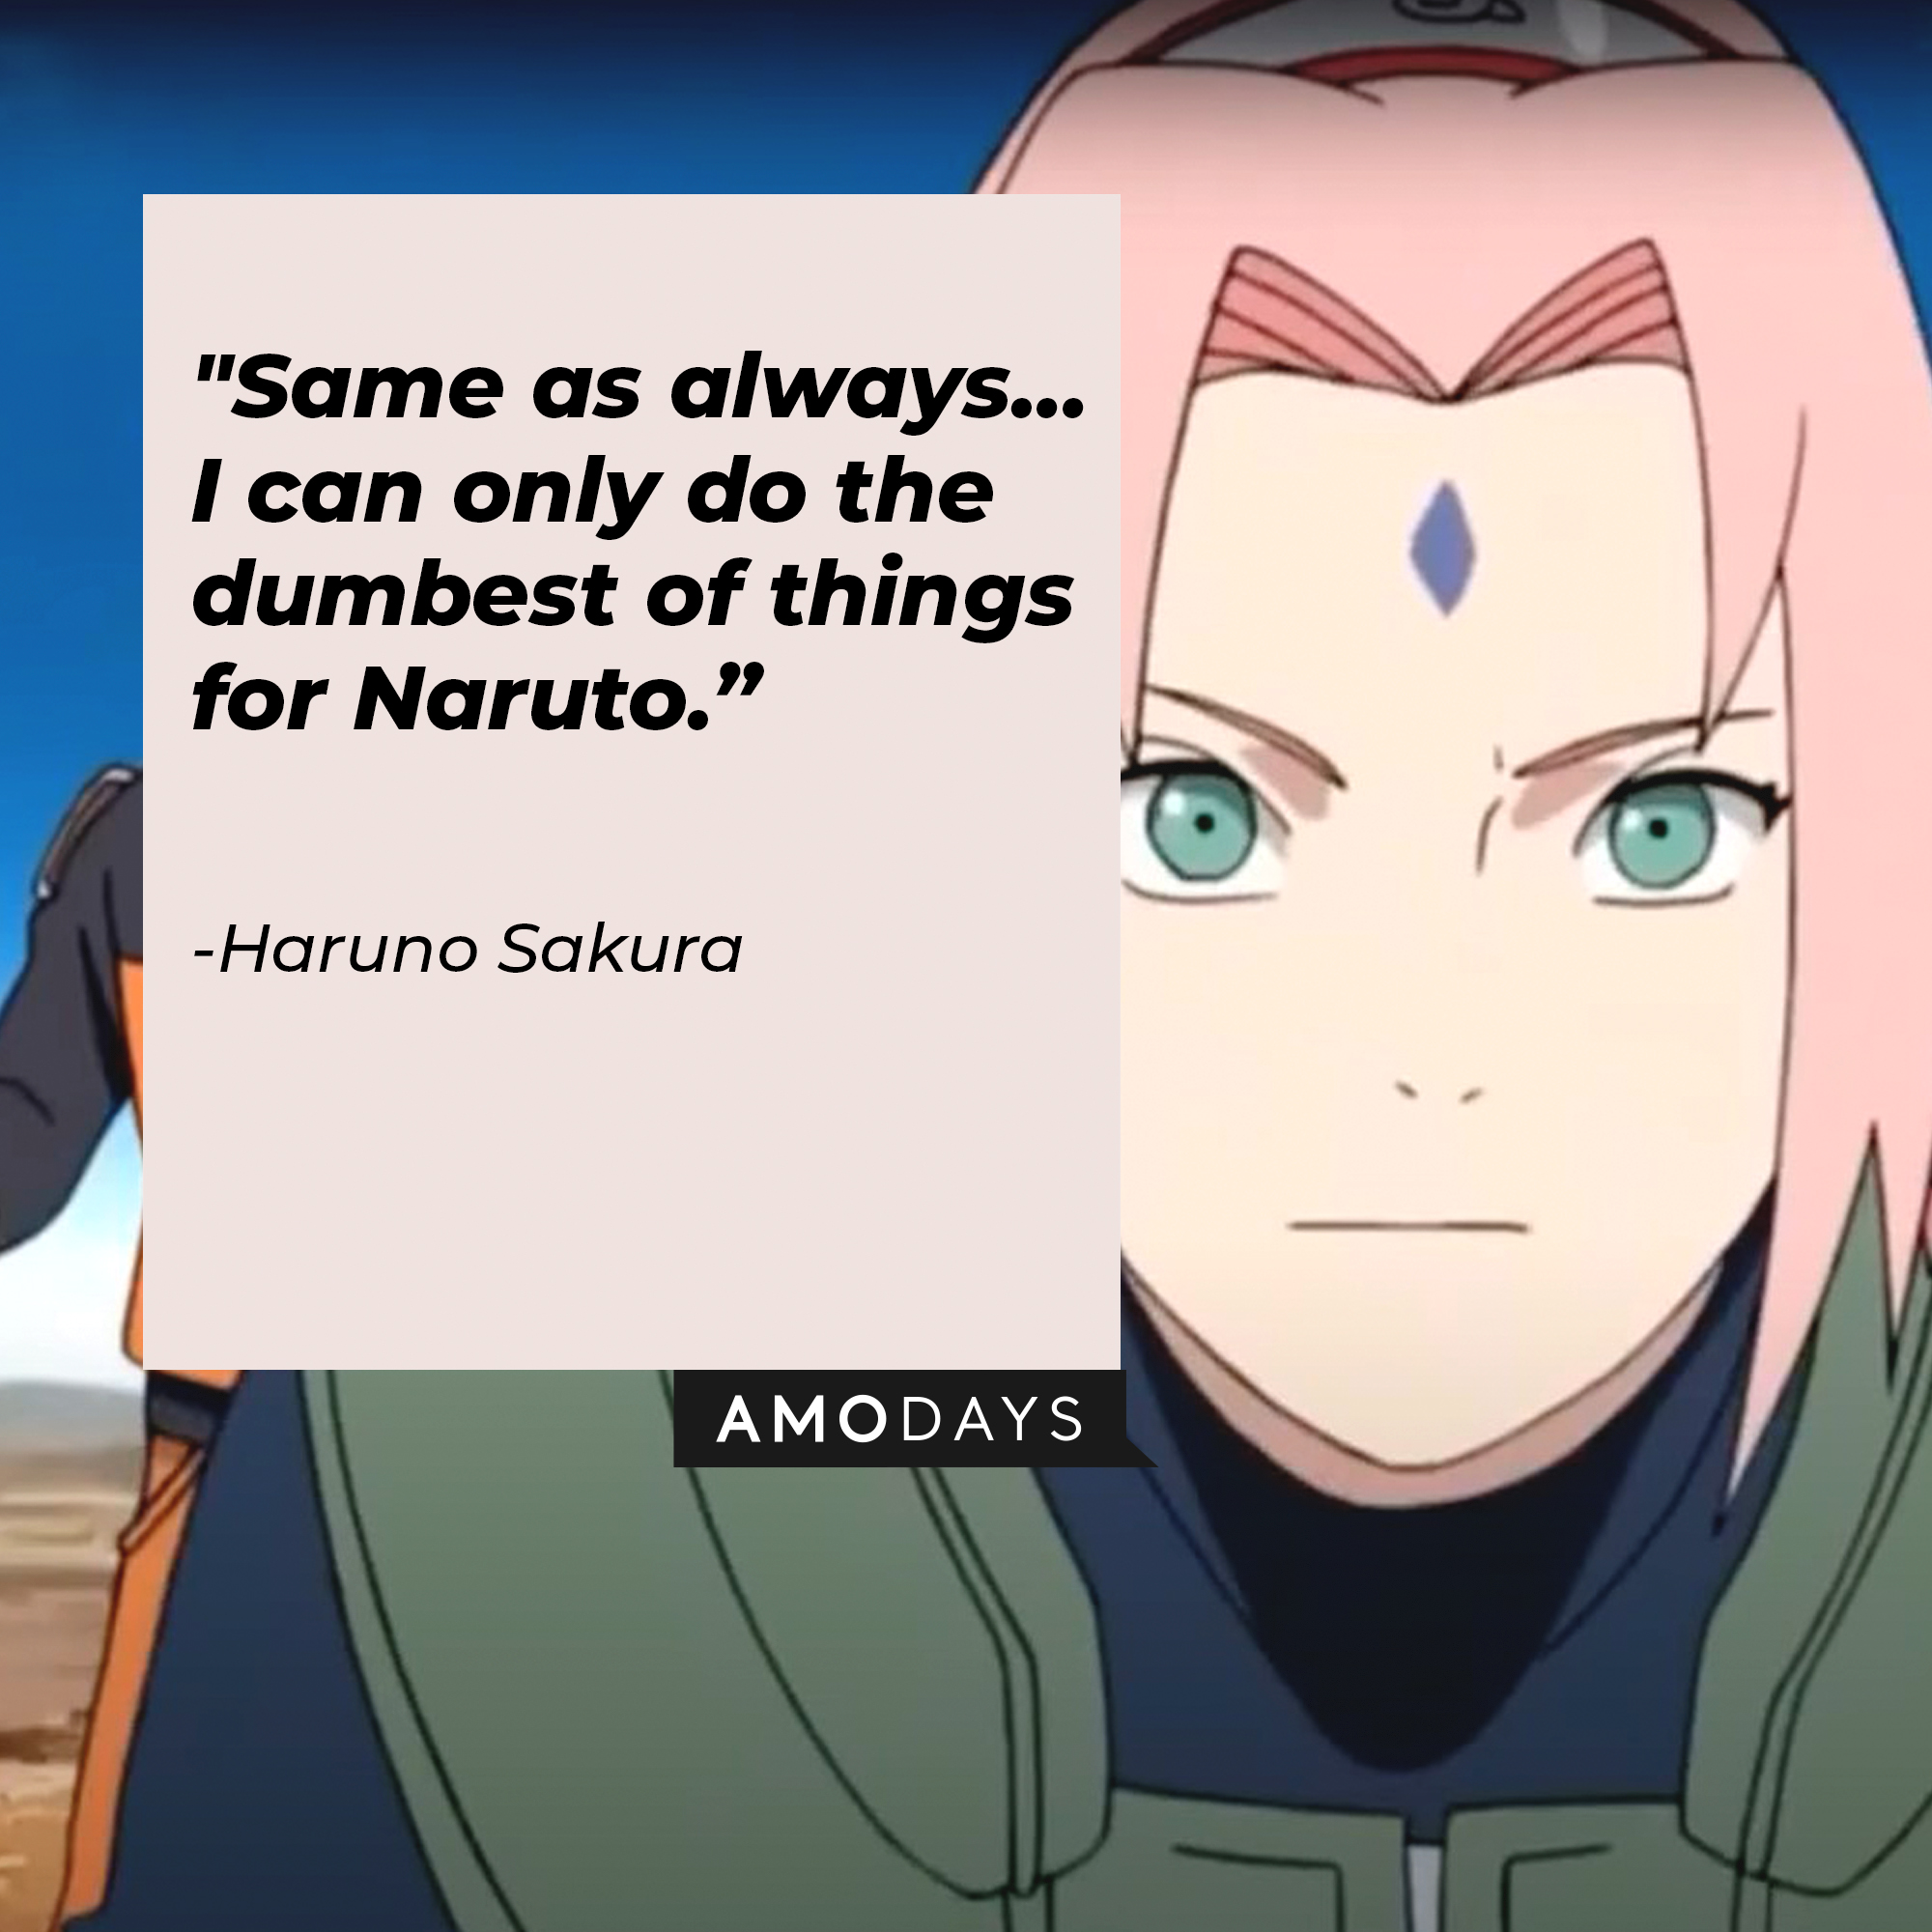 Haruno Sakura’s quote: “Same as always… I can only do the dumbest of things for Naruto.” | Source: facebook.com/narutoofficialsns